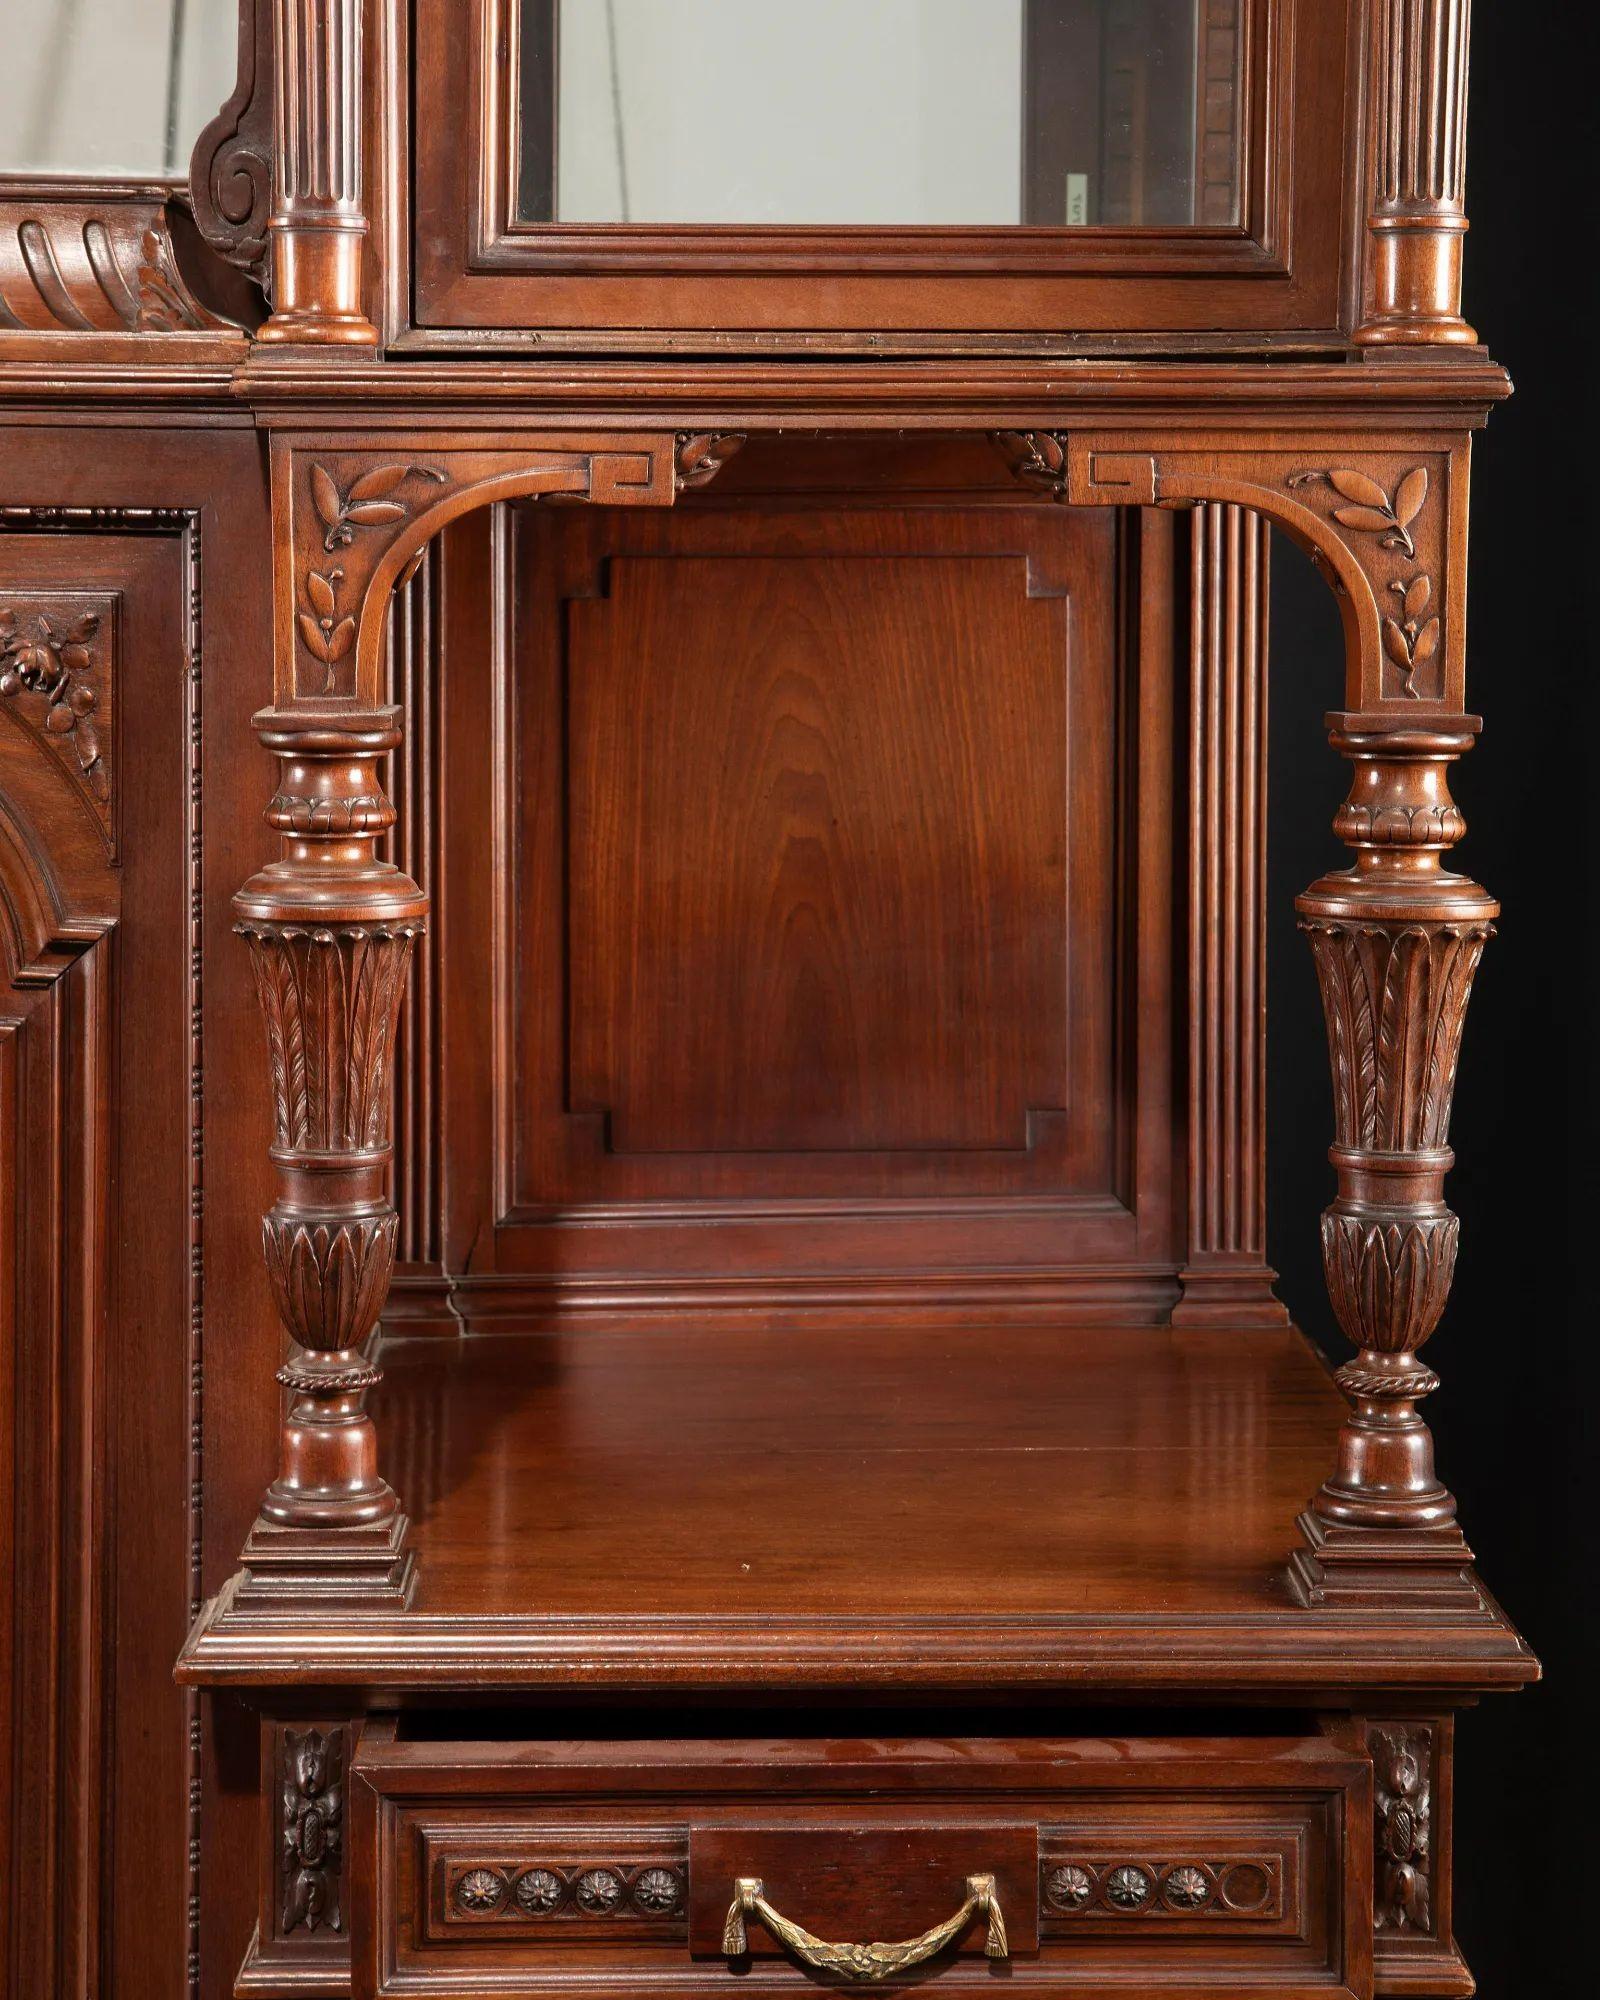 Late 19th century monumental French buffet.
 
Carved walnut with crest, ribbon and garland details, three inset Wedgwood porcelain plaques, glazed doors, and mirrored back.
 
Dimensions:
 
111